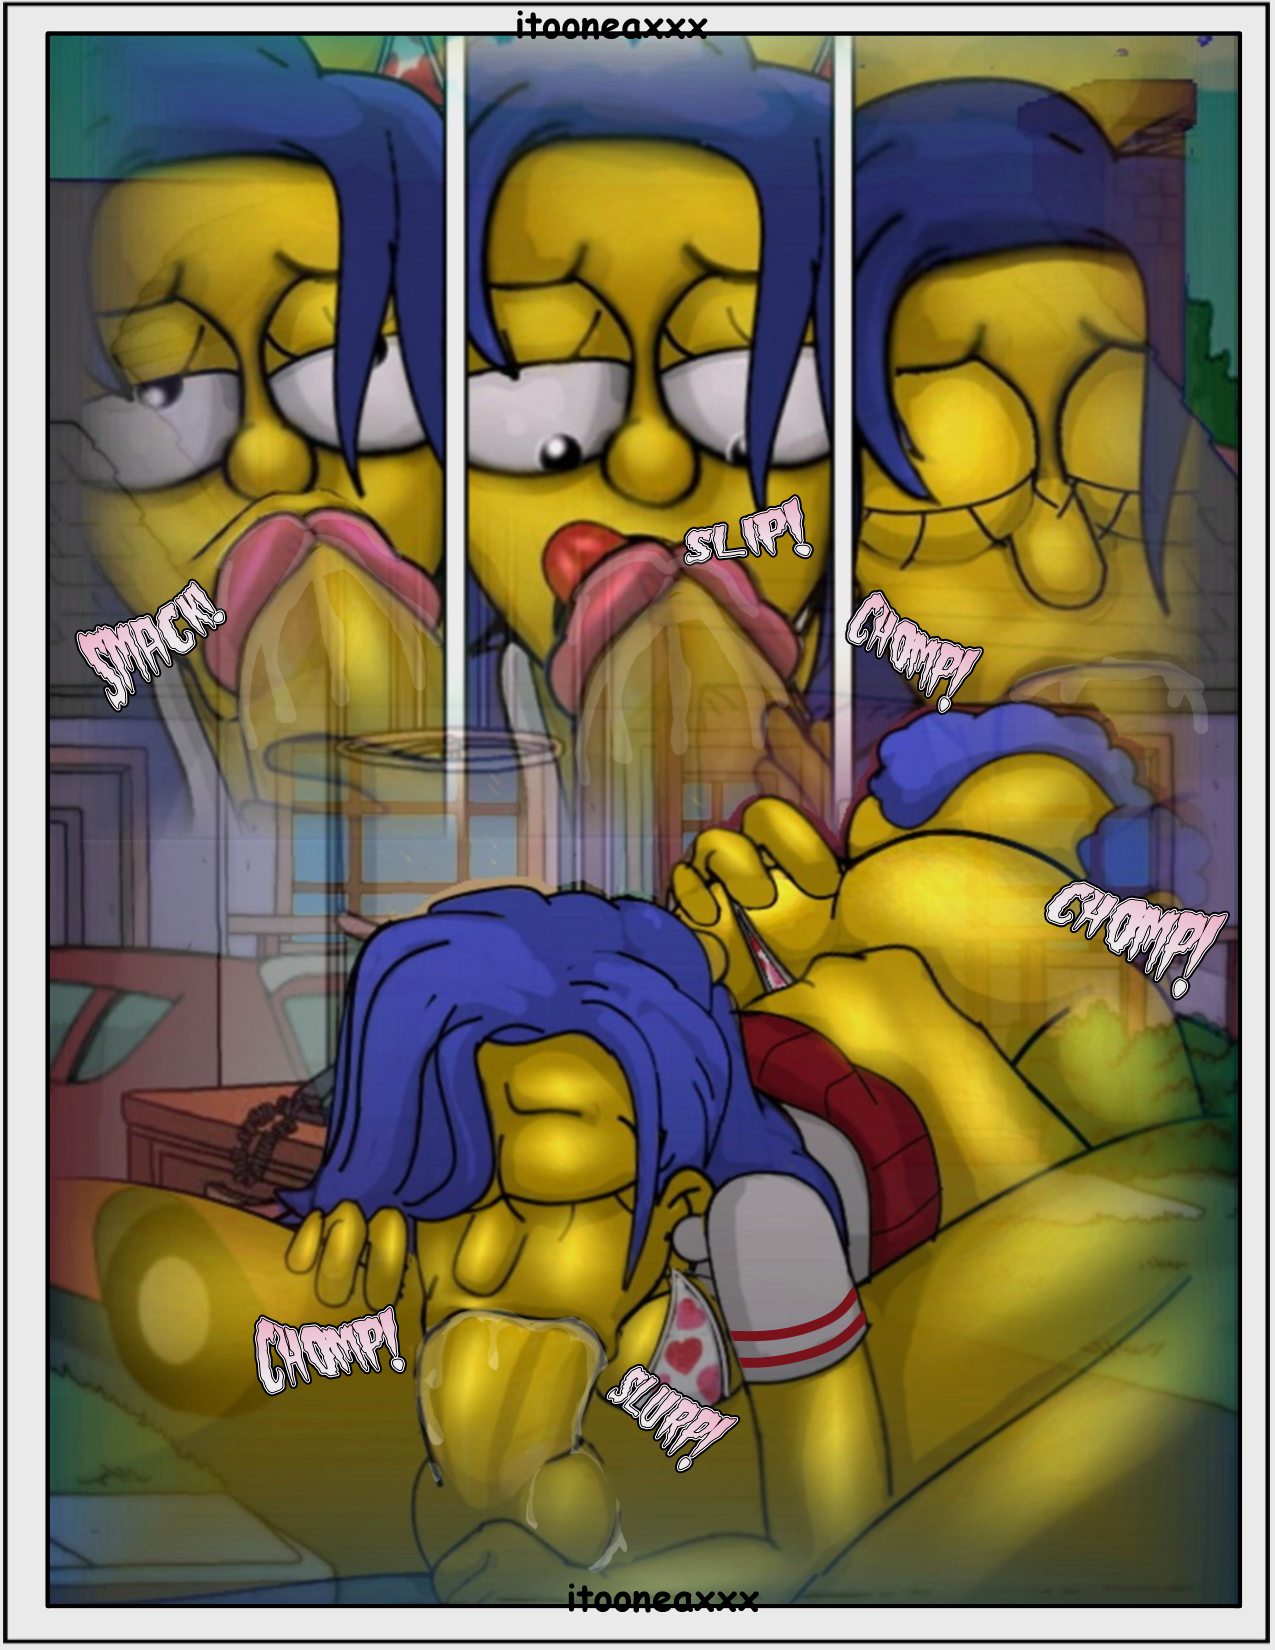 The Simpsons – Affinity 4 by Itooneaxxx 